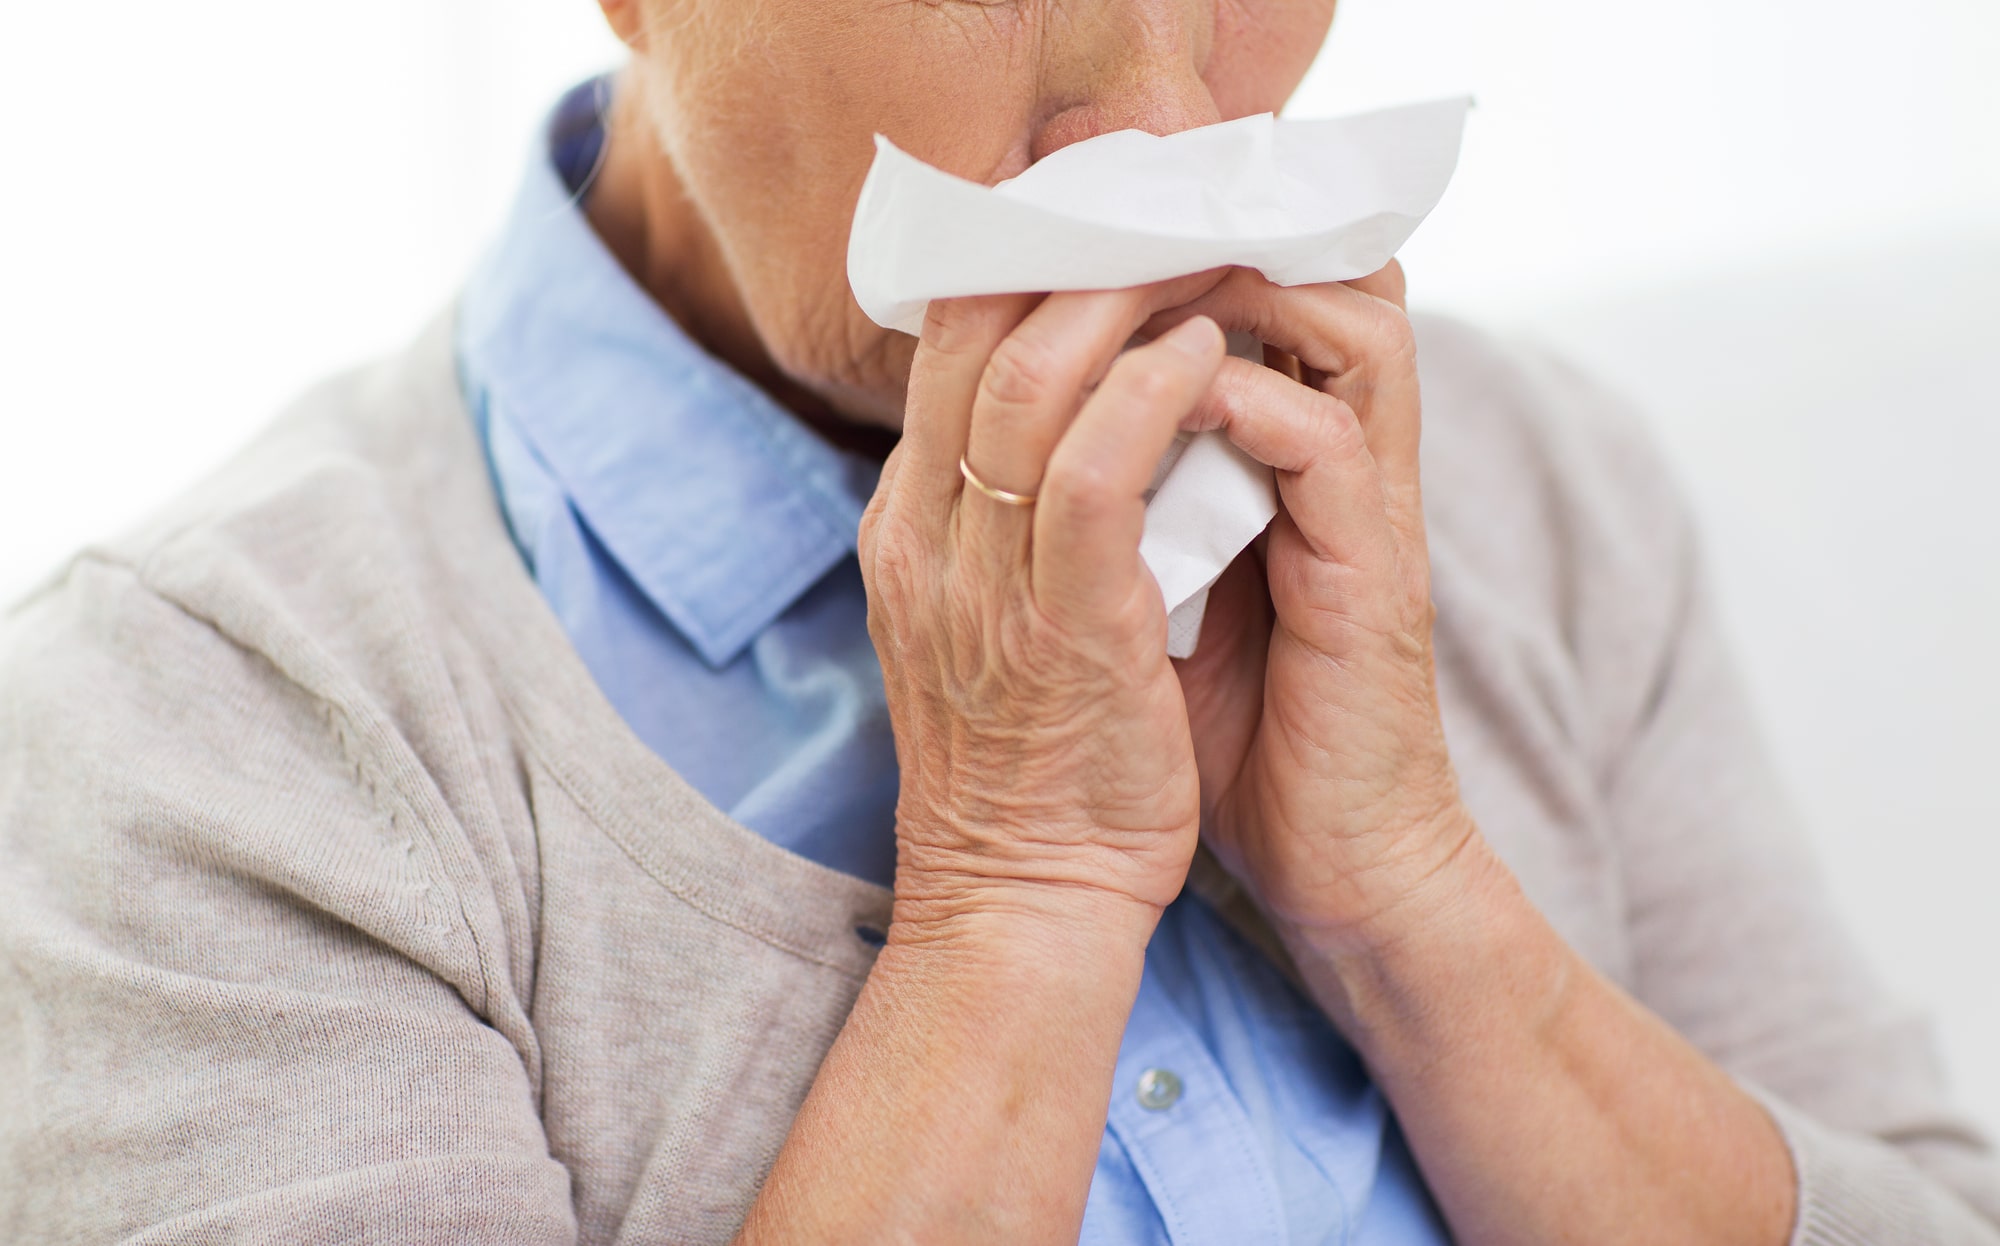 A sick person uses a tissues to blow their nose. Runny nose can be a symptom of prolonged exposure to mold.